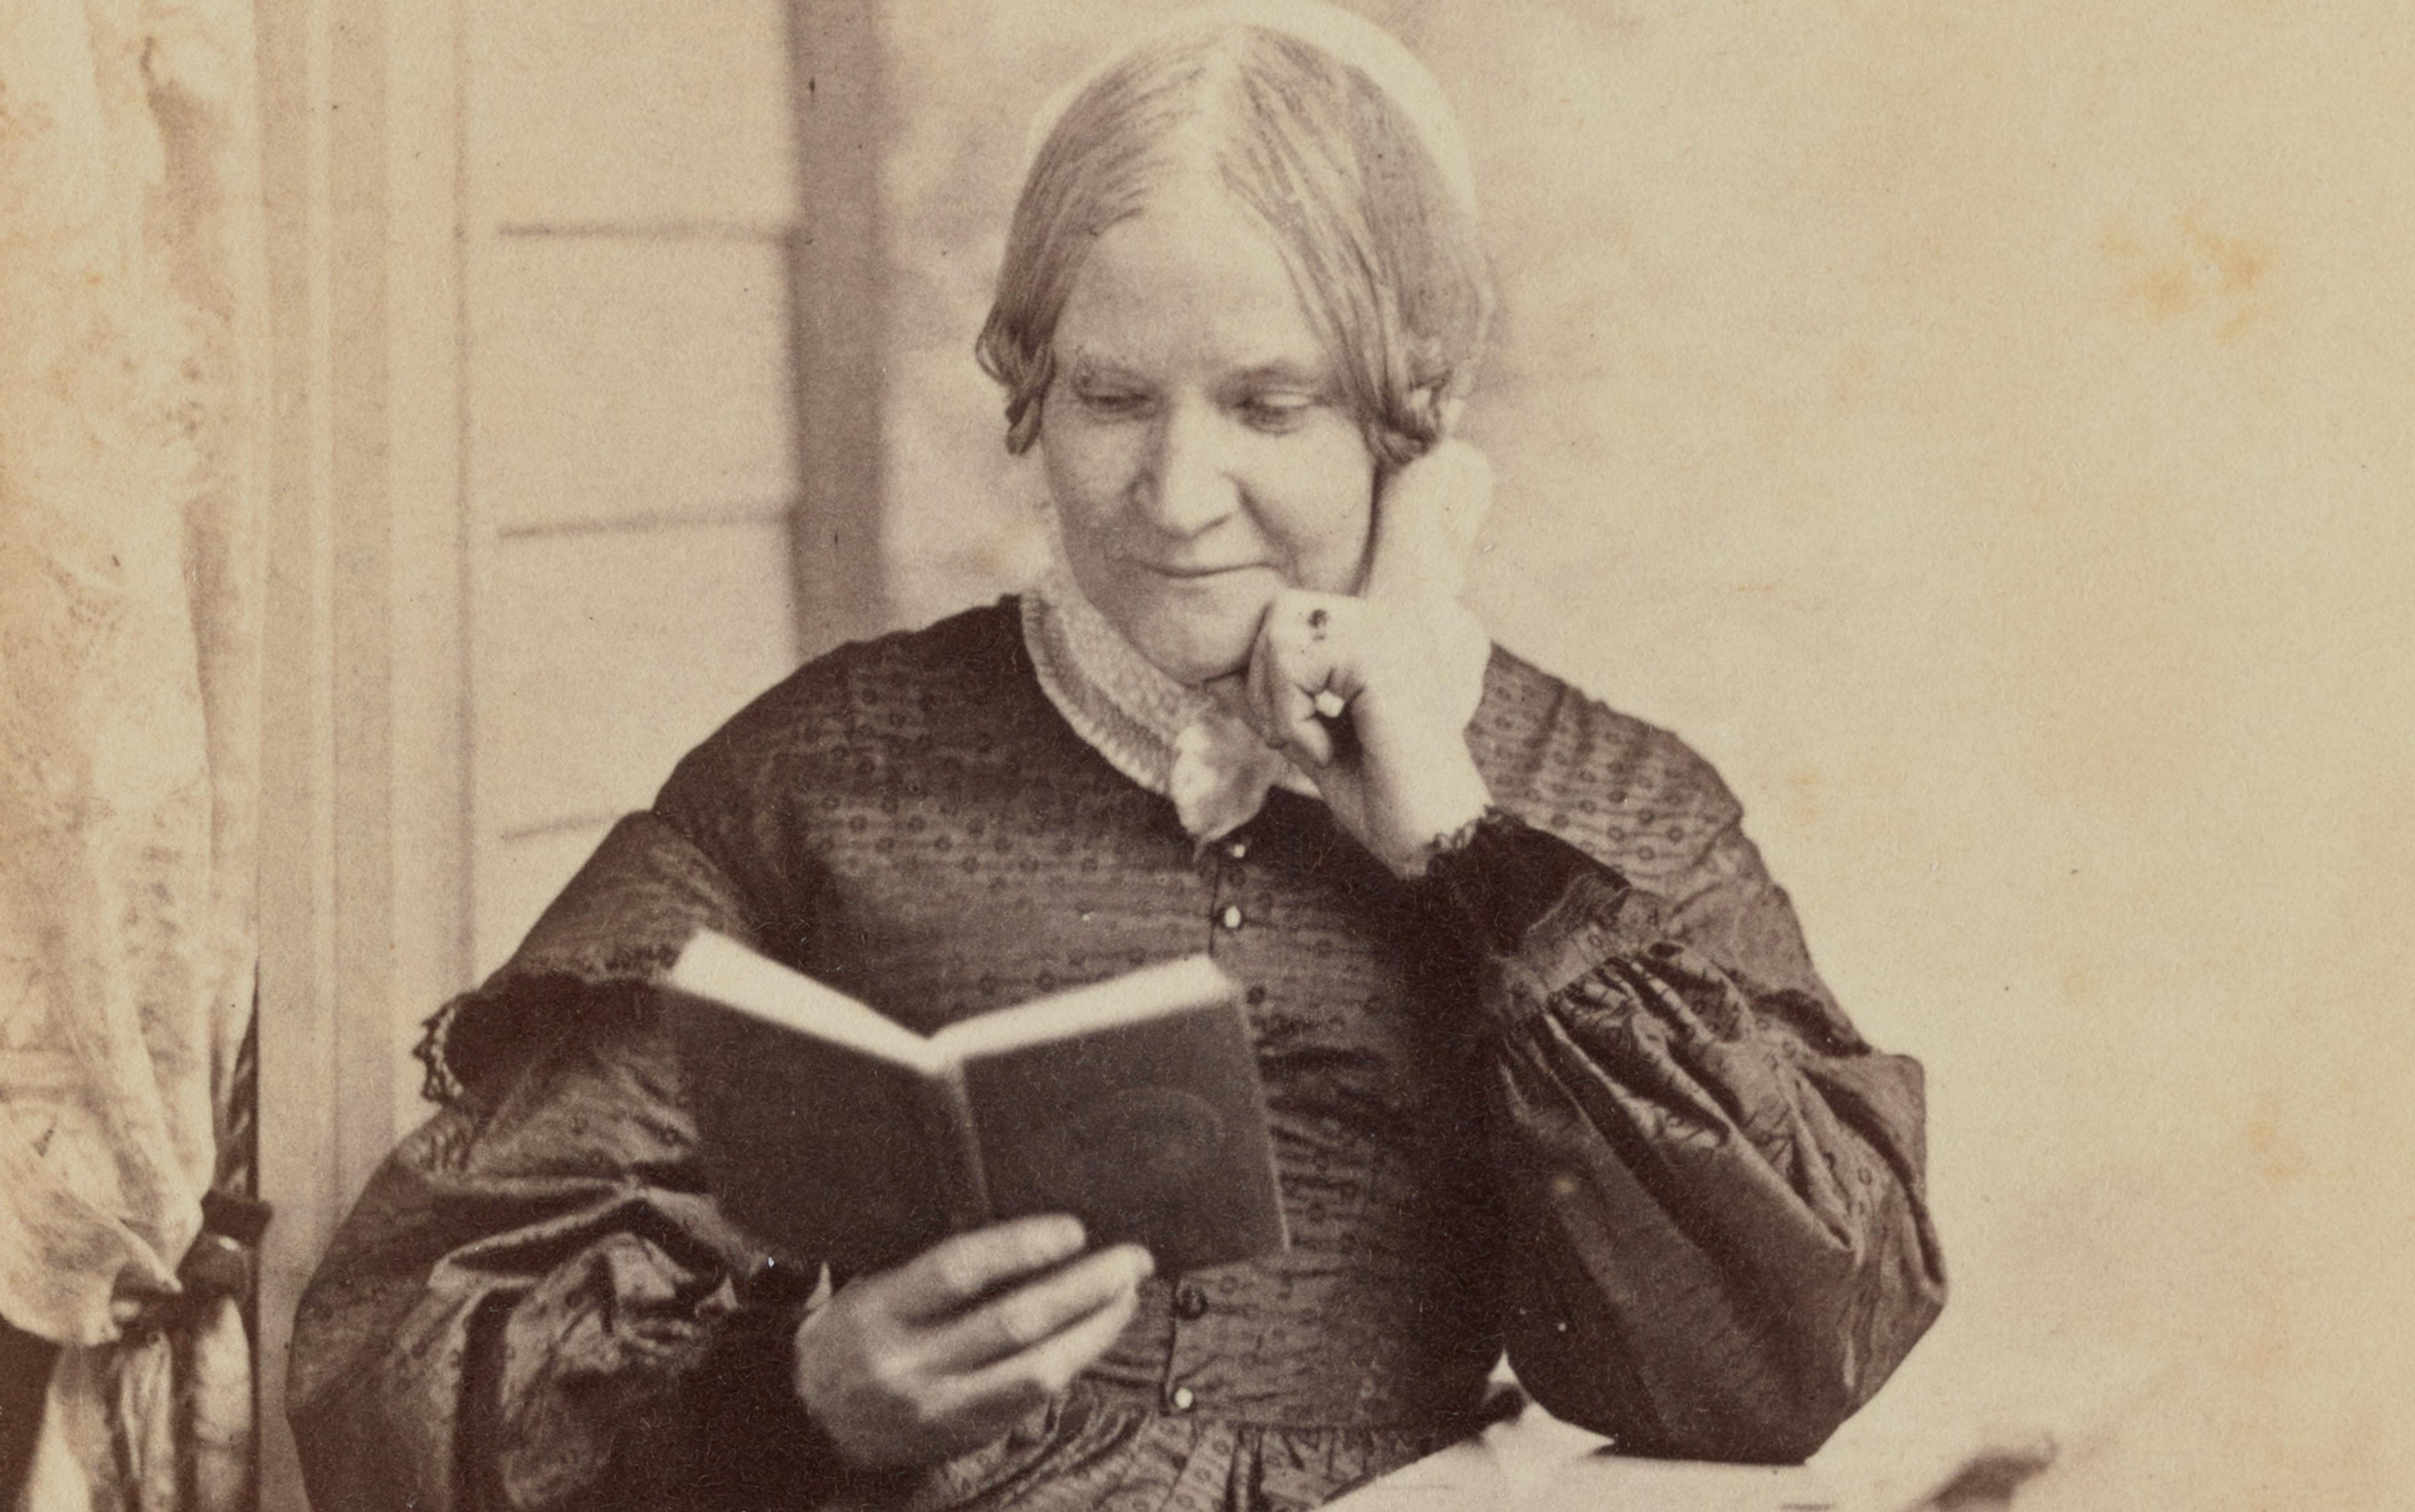 A sepia-toned, historical photograph of a woman sitting and reading a book, wearing a dark dress with puffed sleeves.